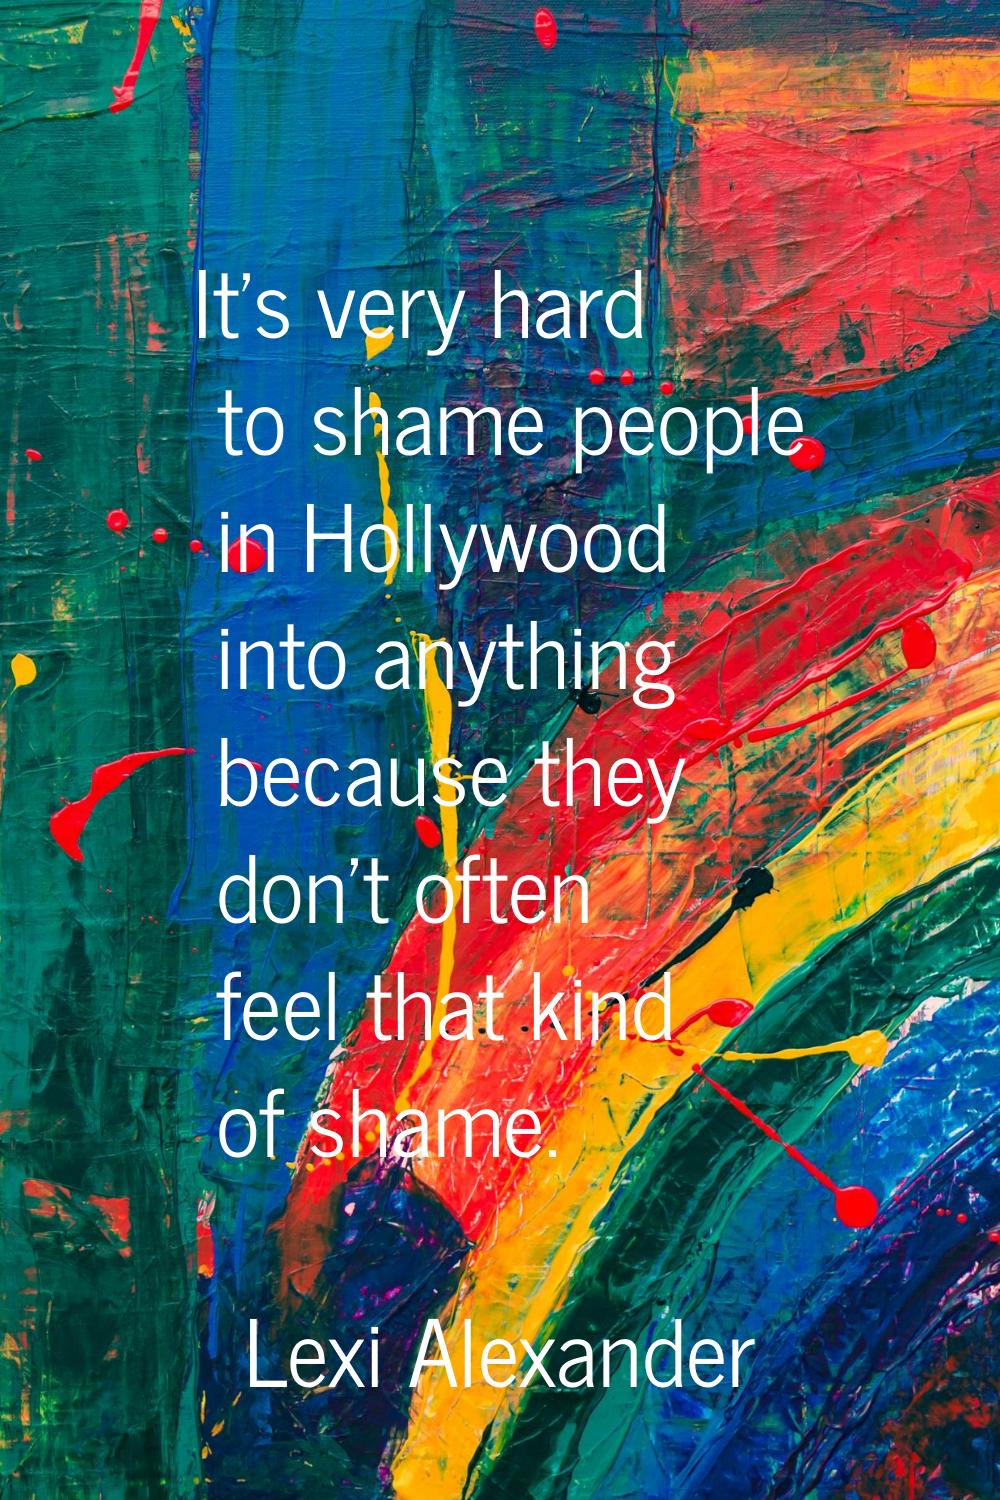 It's very hard to shame people in Hollywood into anything because they don't often feel that kind o